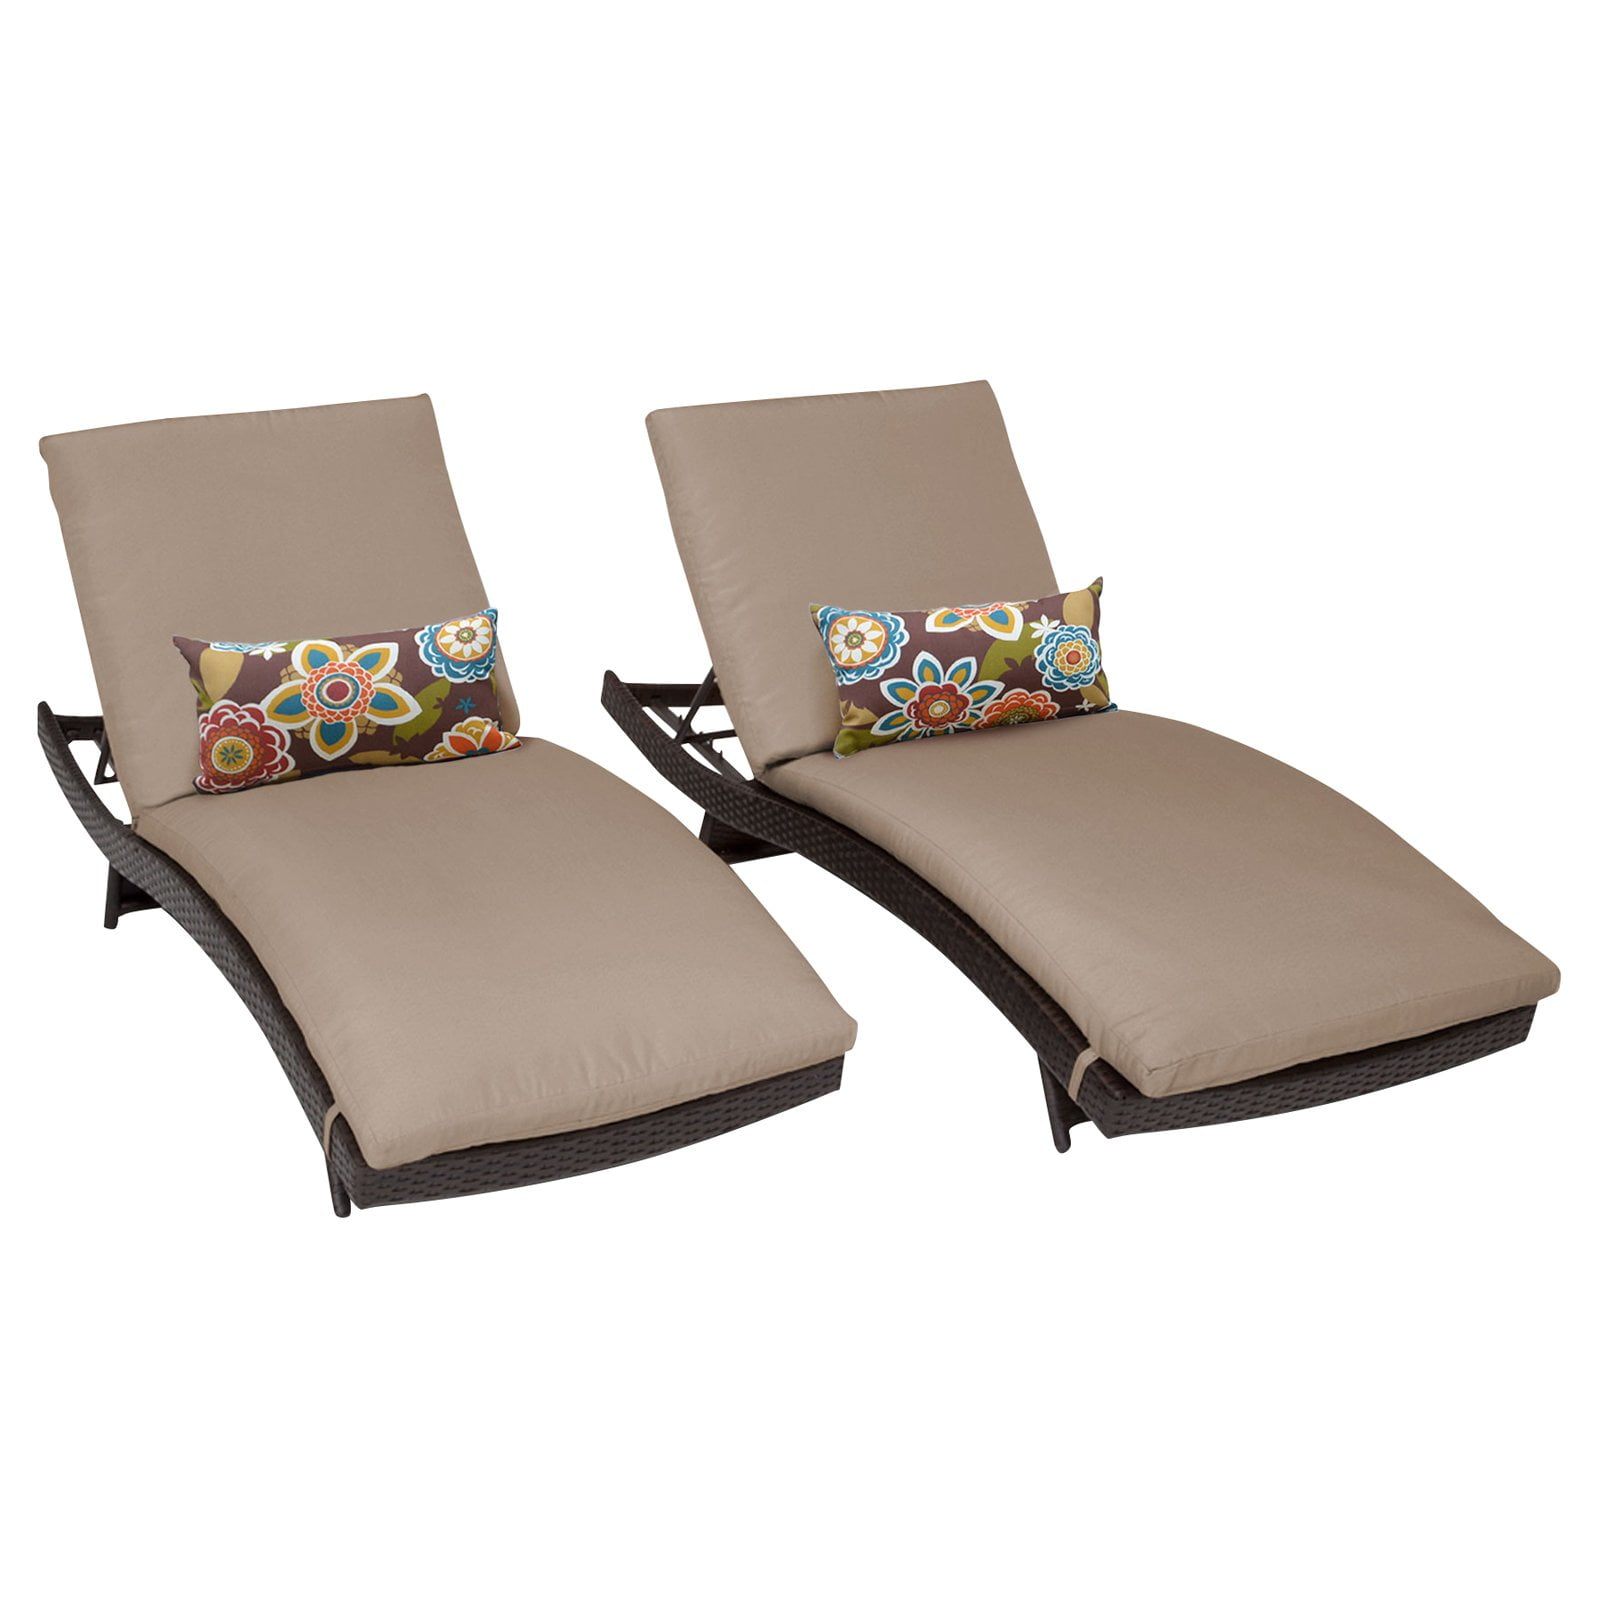 TK Classics Barbados Wicker Curved Patio Chaise Lounge - Set of 2 with Optional Table - Walmart.com